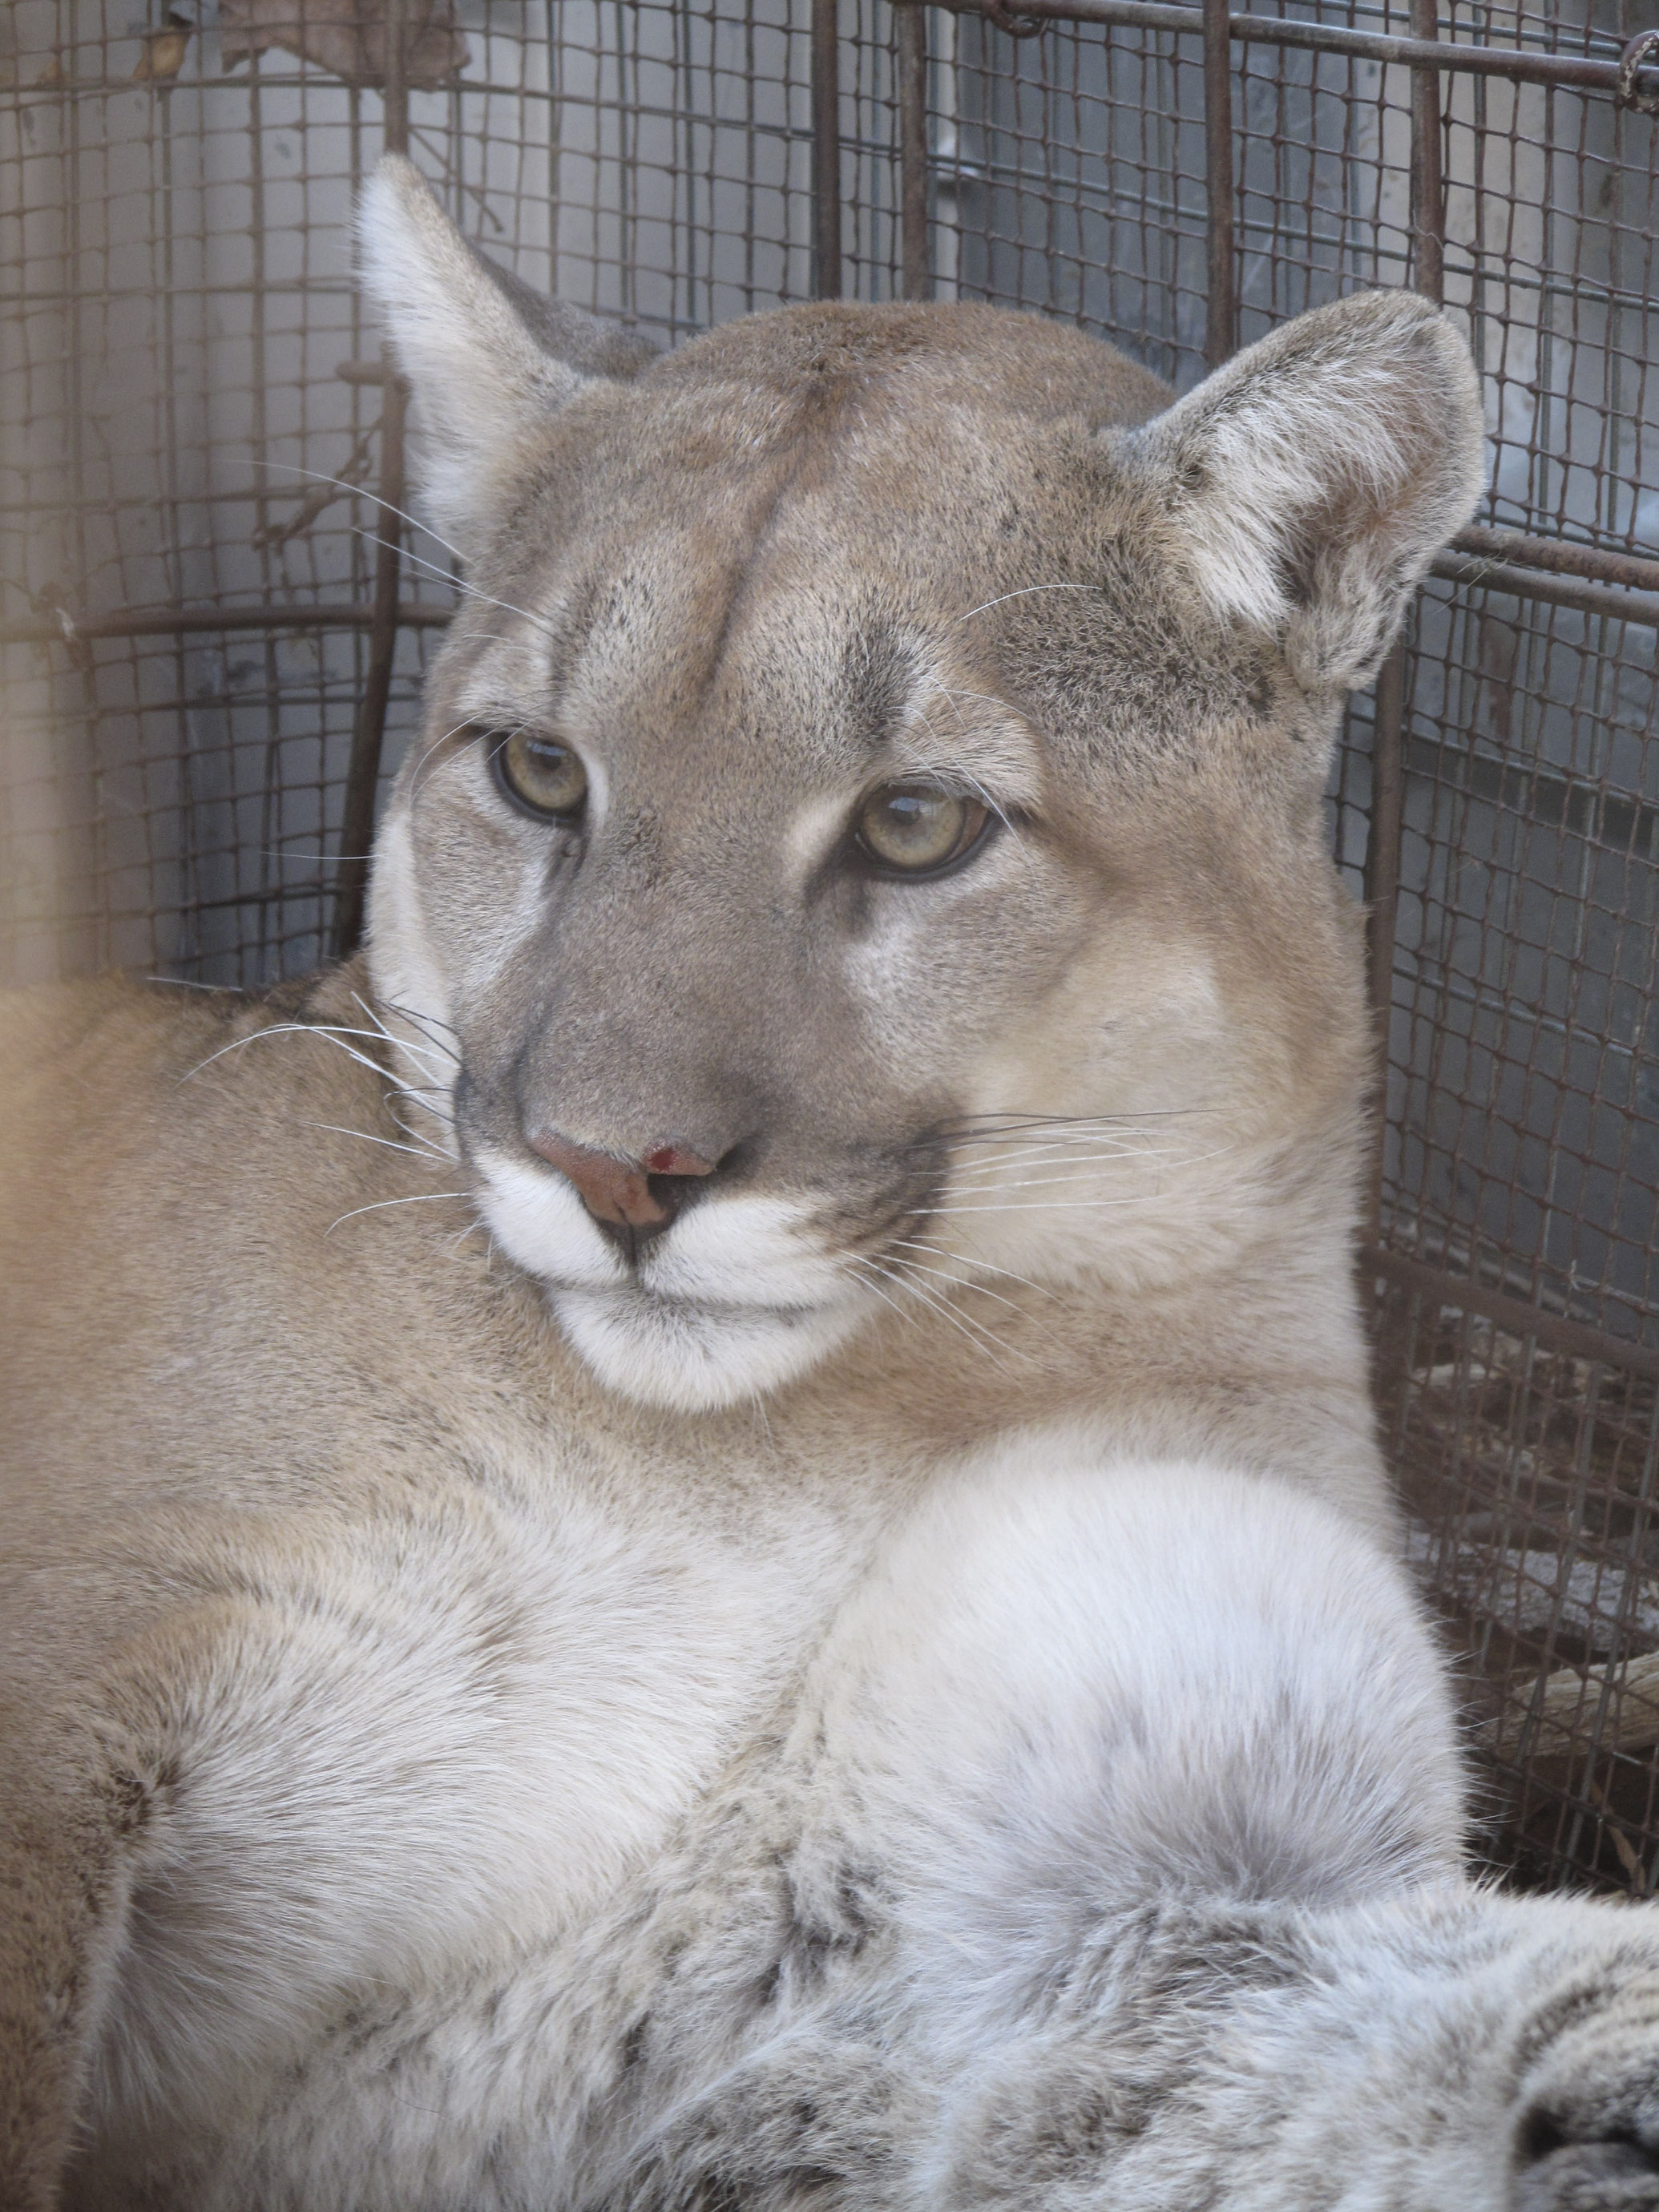 Mountain Lion Sedated in Trap